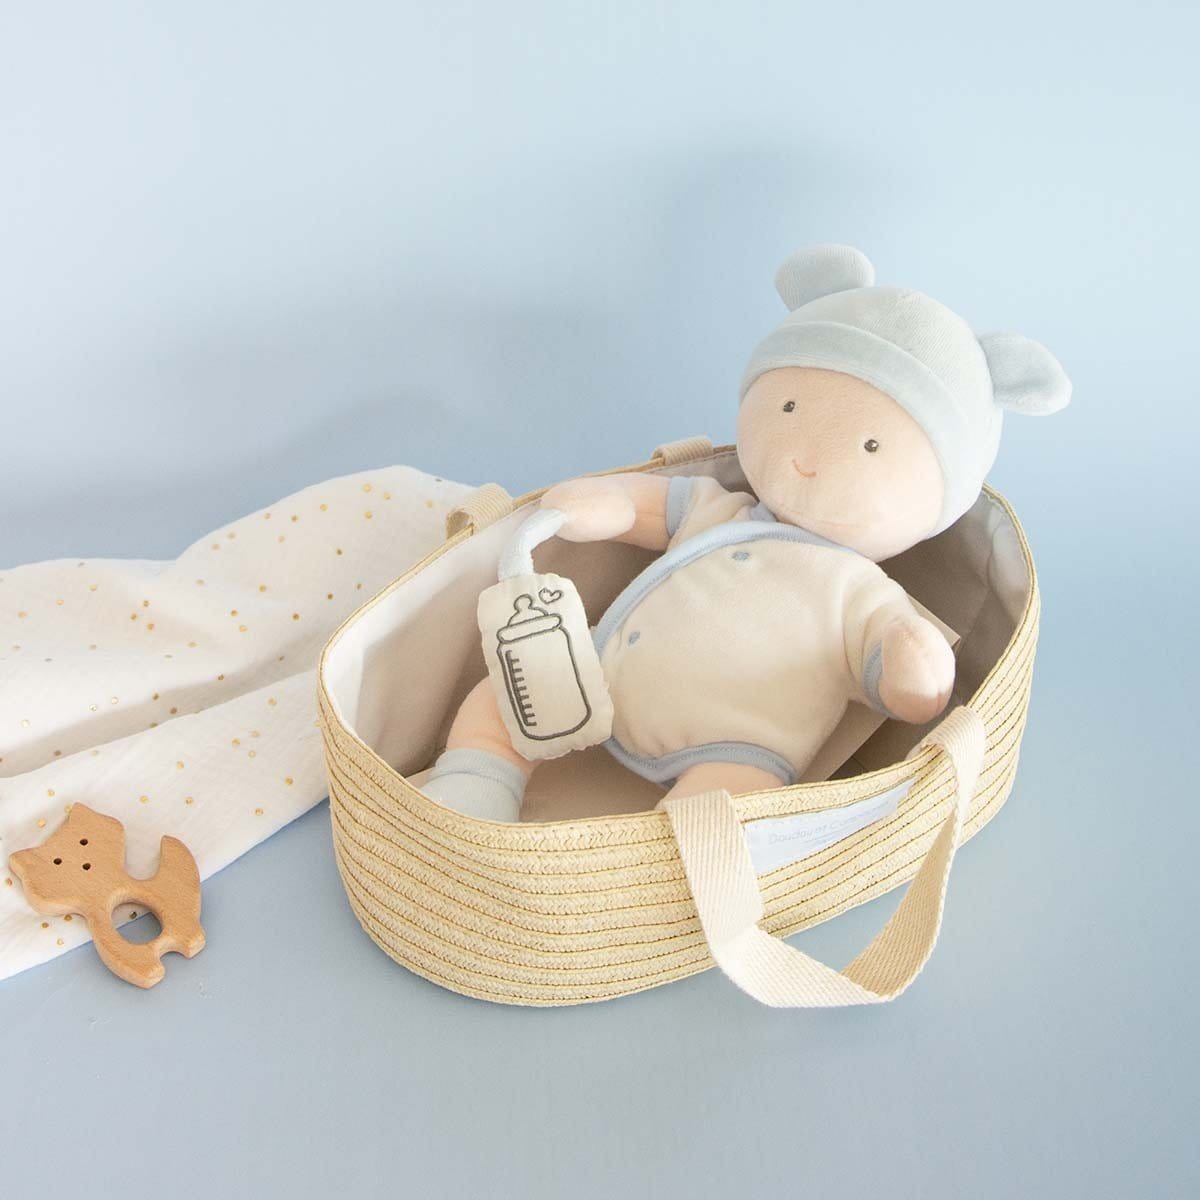 Little Baby with Basket - Blue 28cm